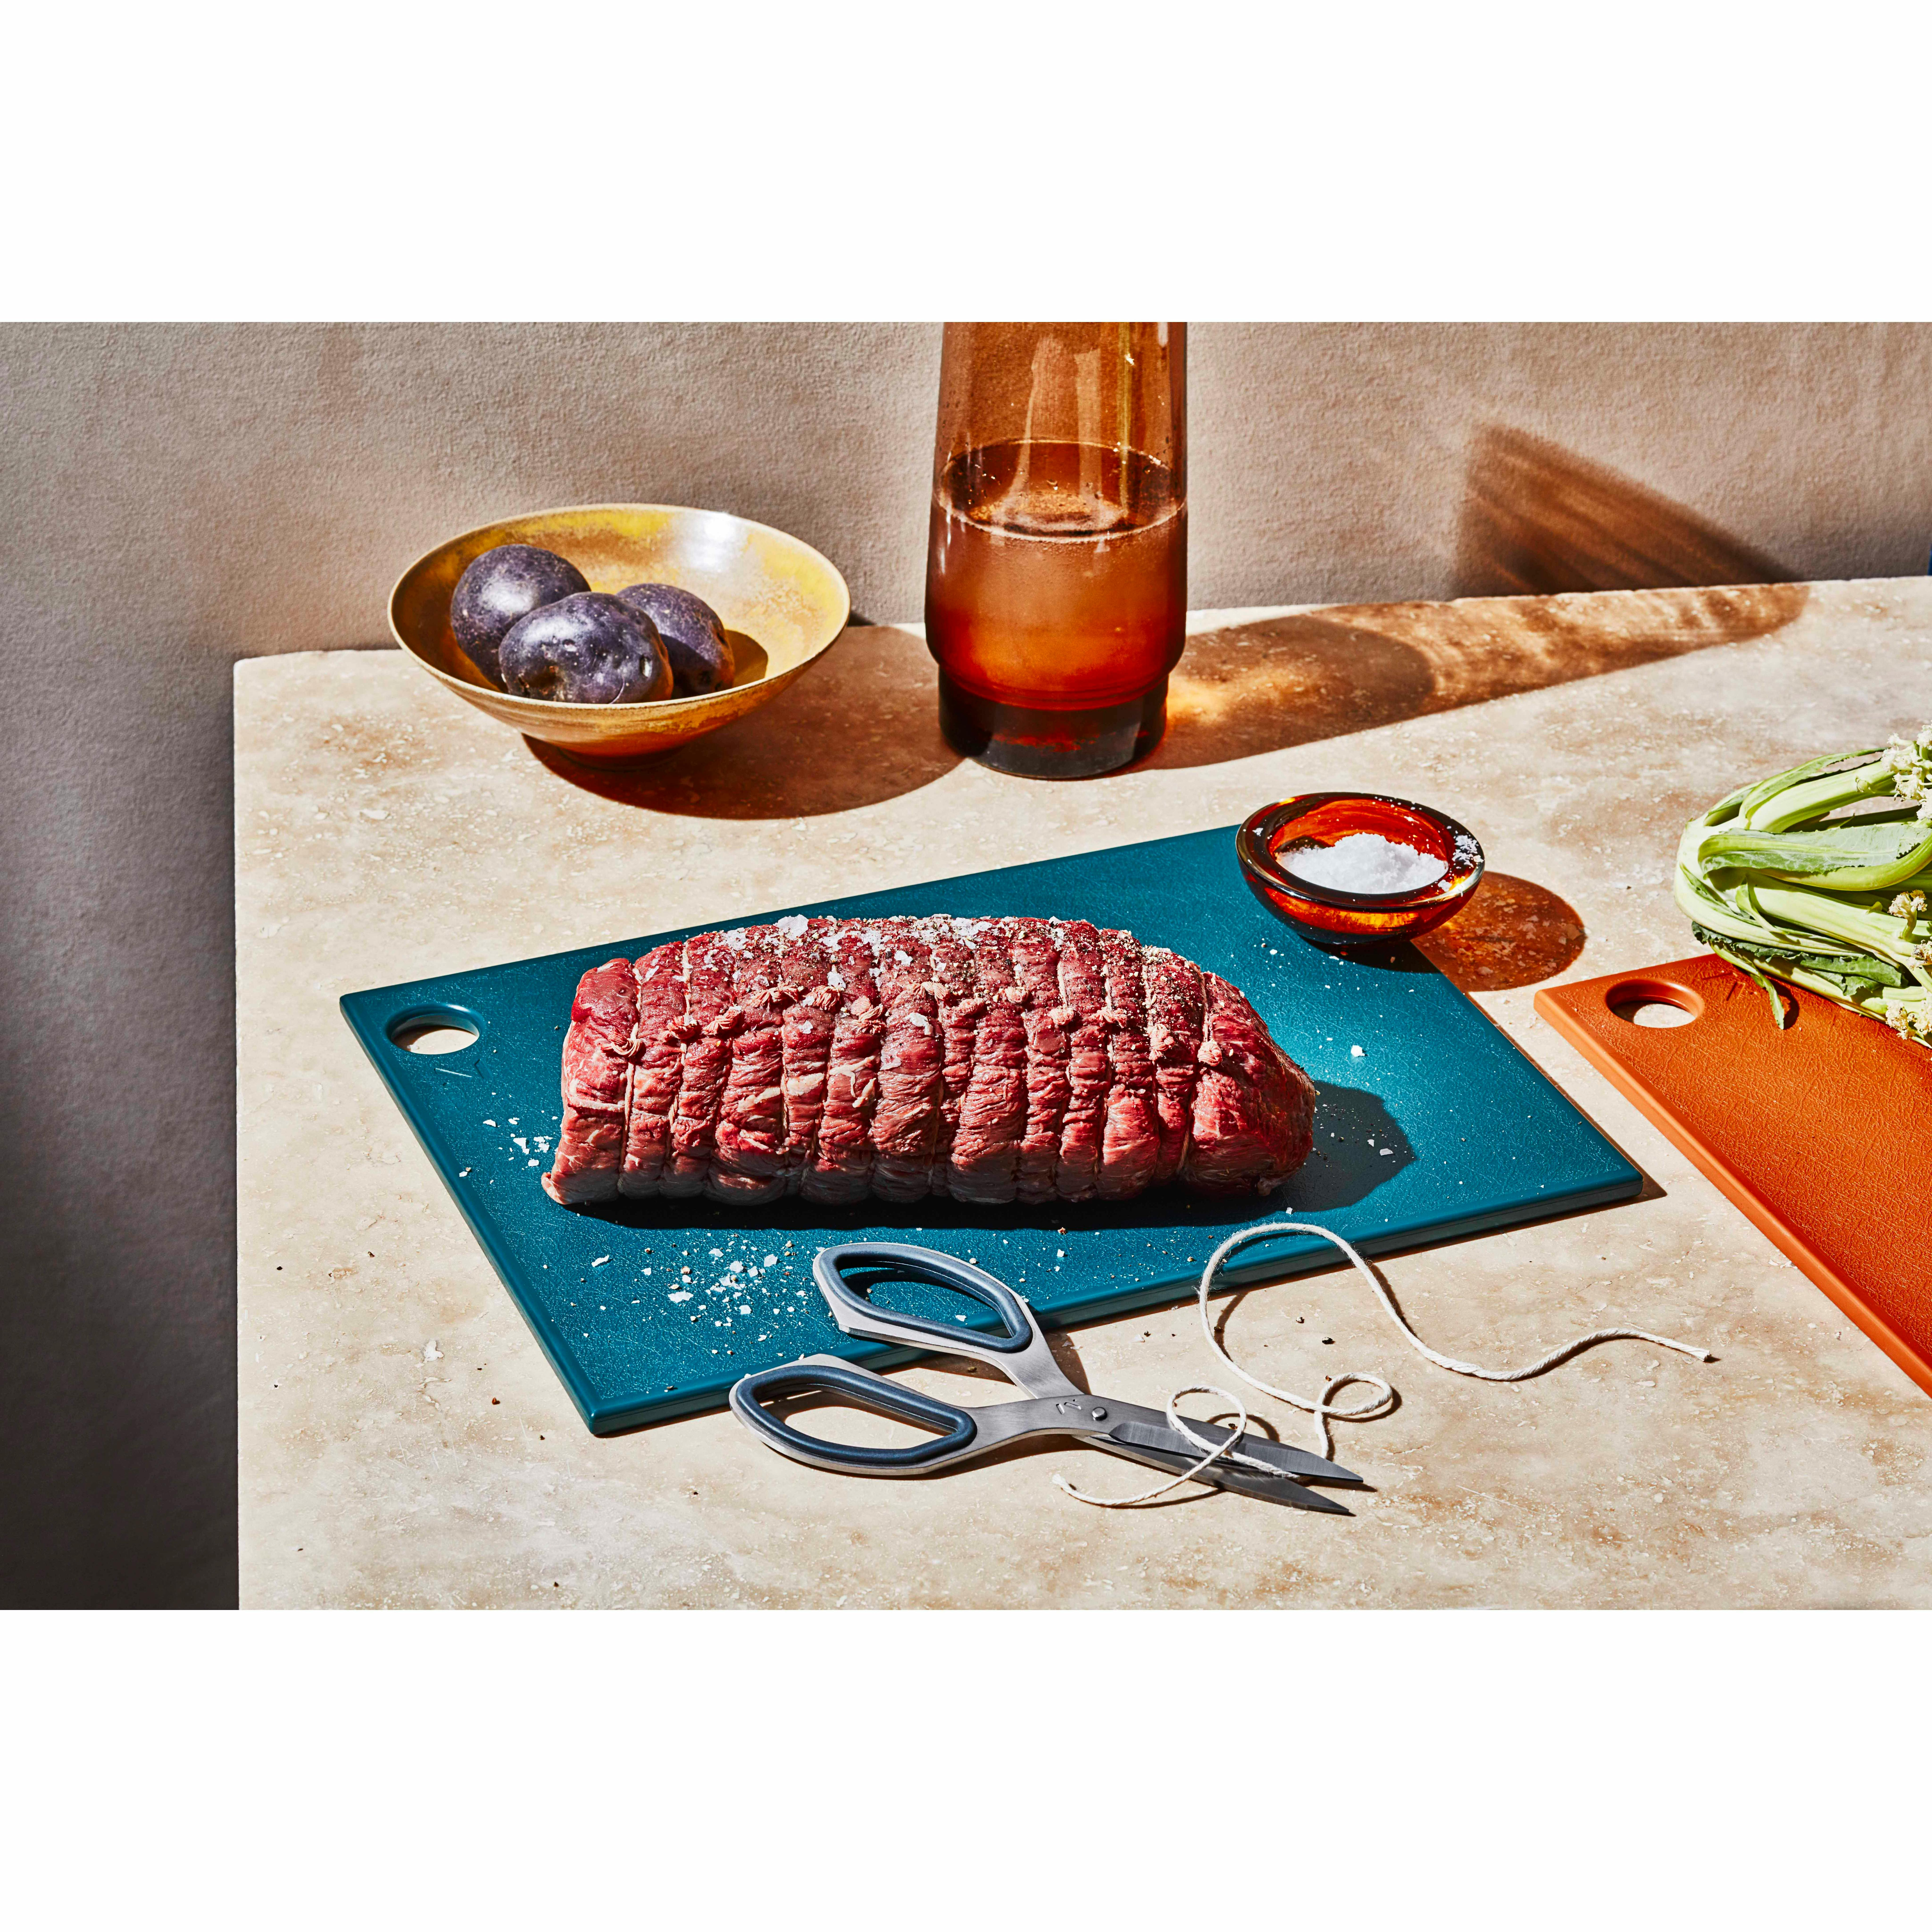 The Bestselling Material reBoard Cutting Board Is on Sale for a Limited  Time